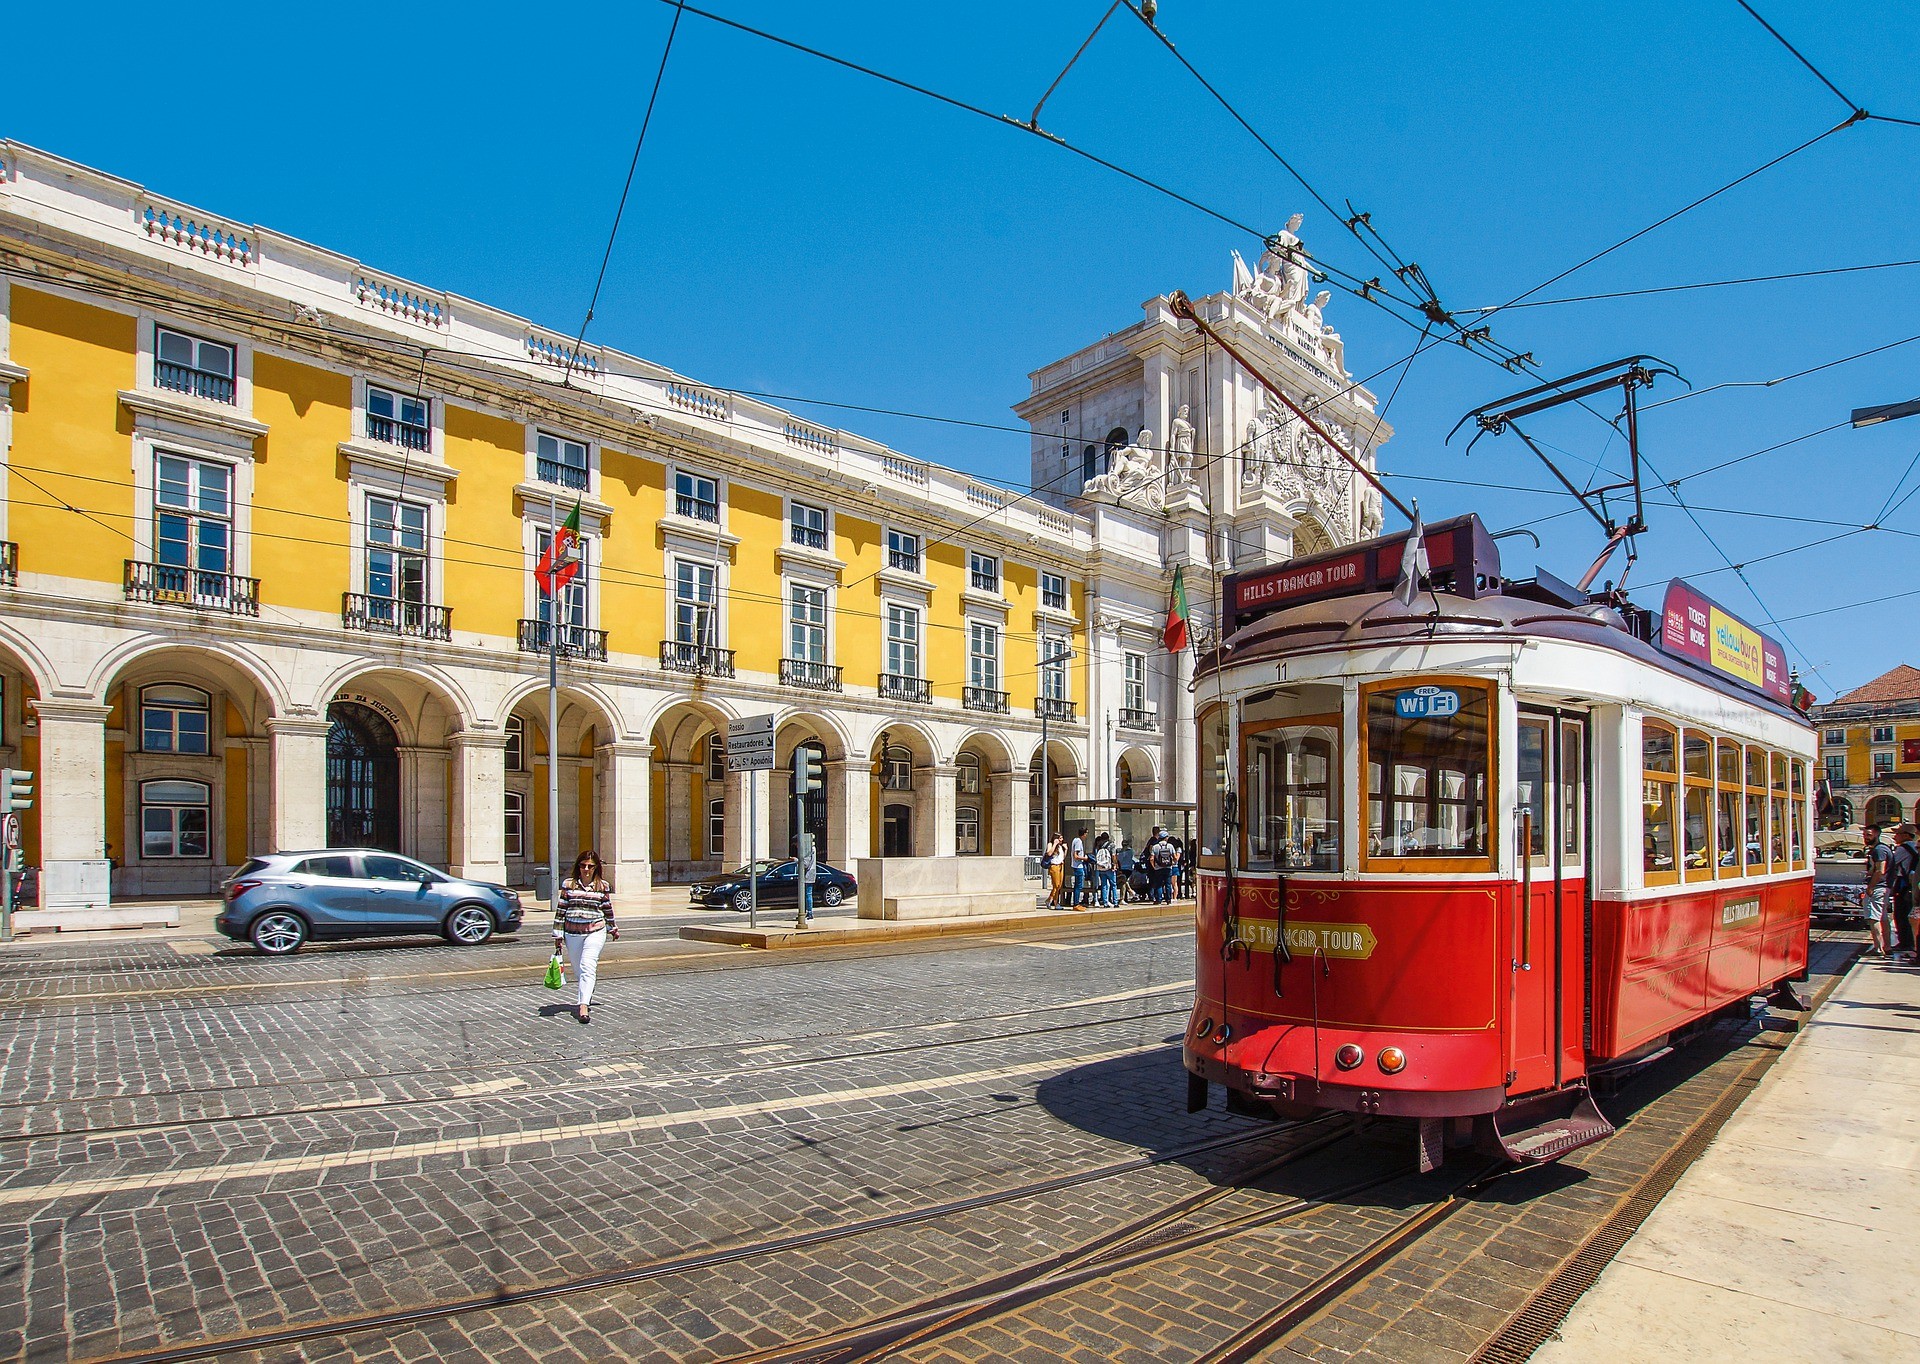 Lisbon, the city that changed its transport after the last major crisis